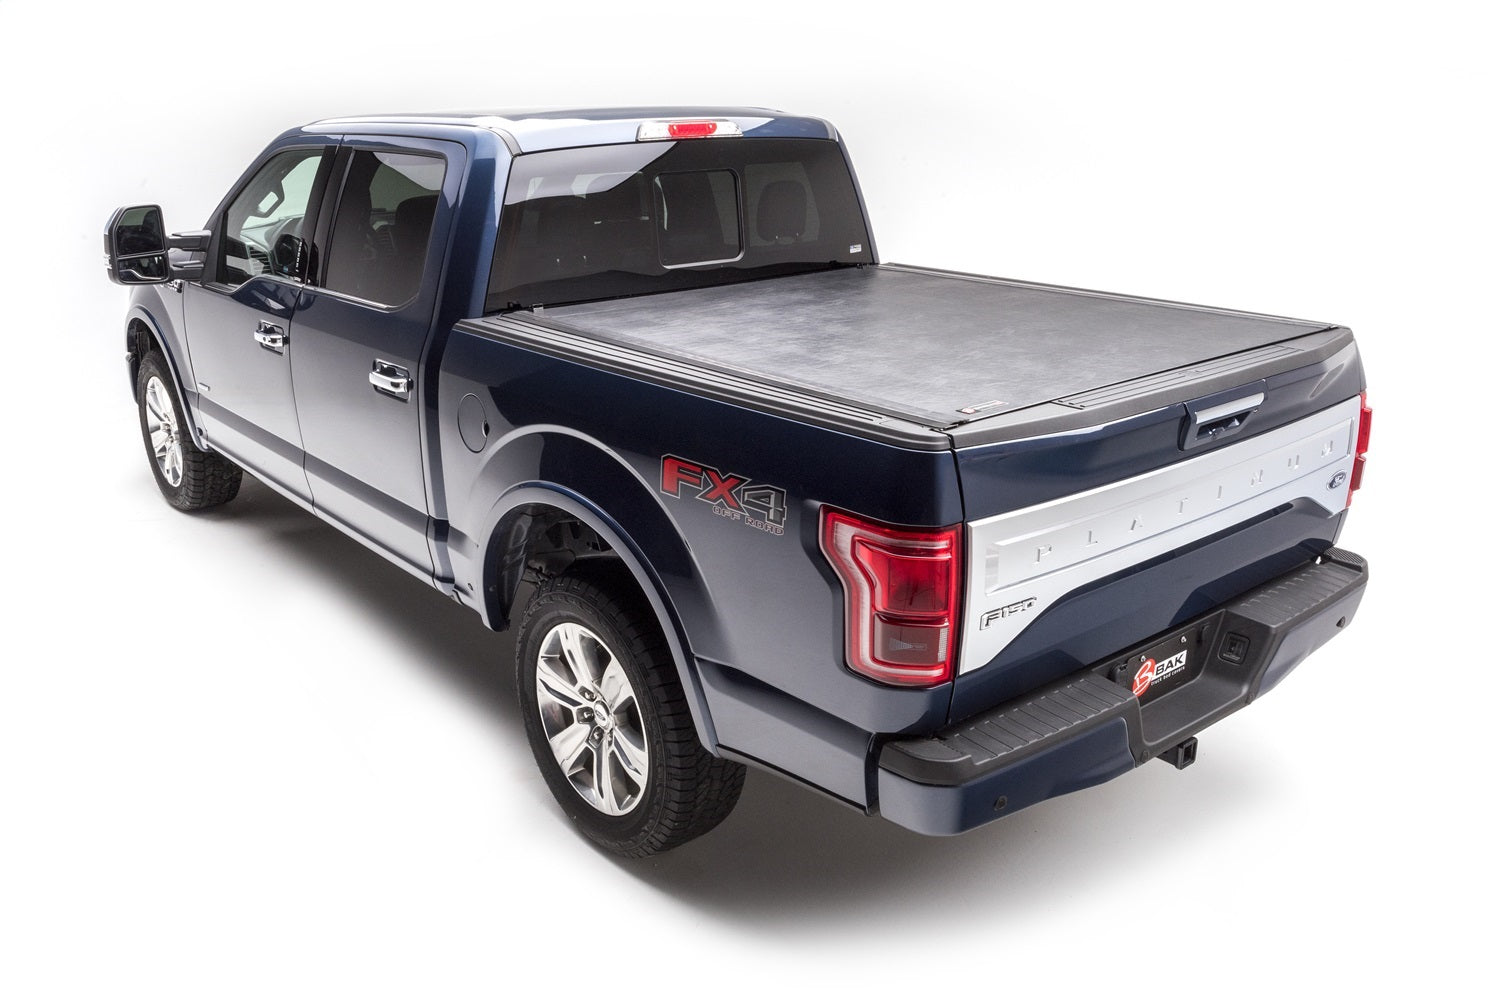 BAK Industries 39327 Revolver X2 Hard Rolling Truck Bed Cover Fits 15-20 F-150